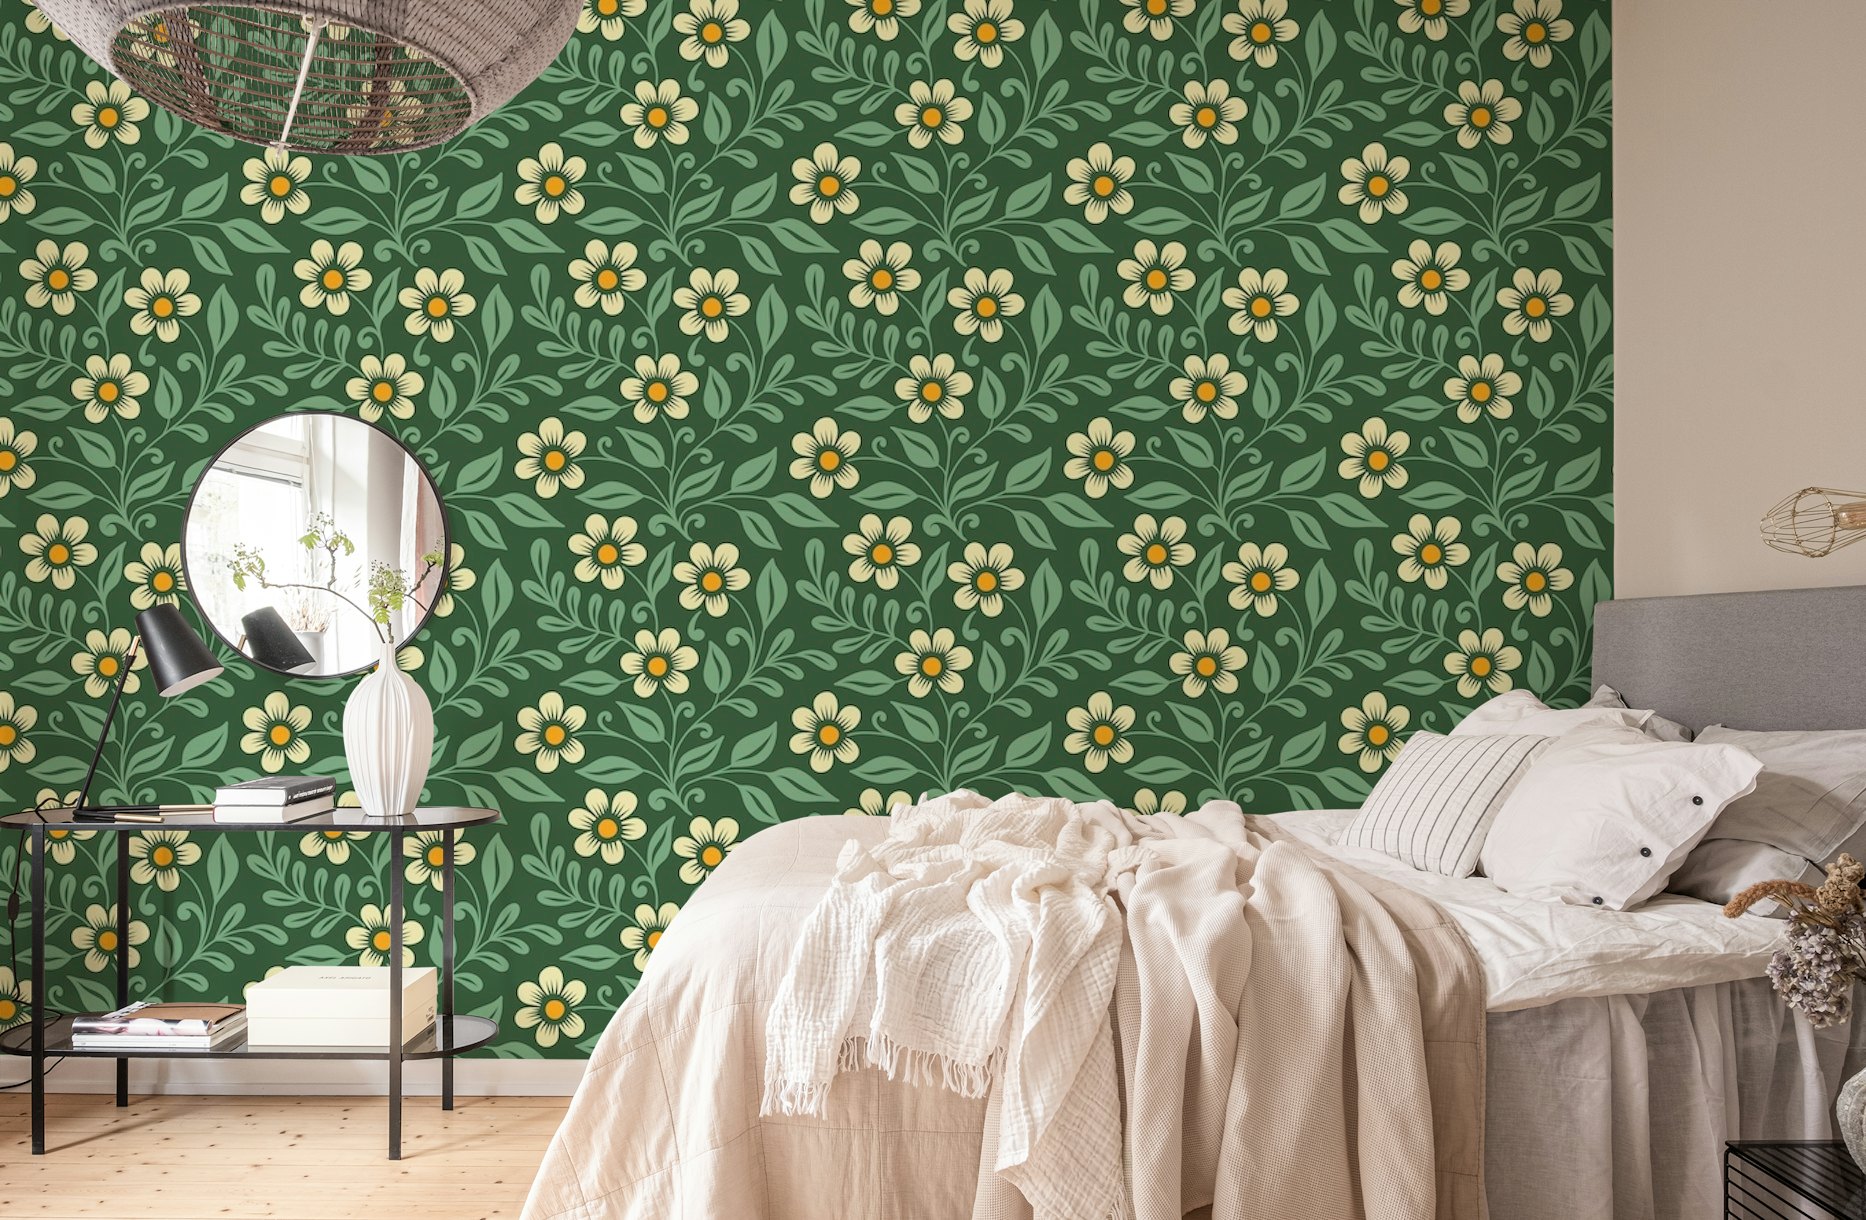 2207 Ditsy floral pattern tapete